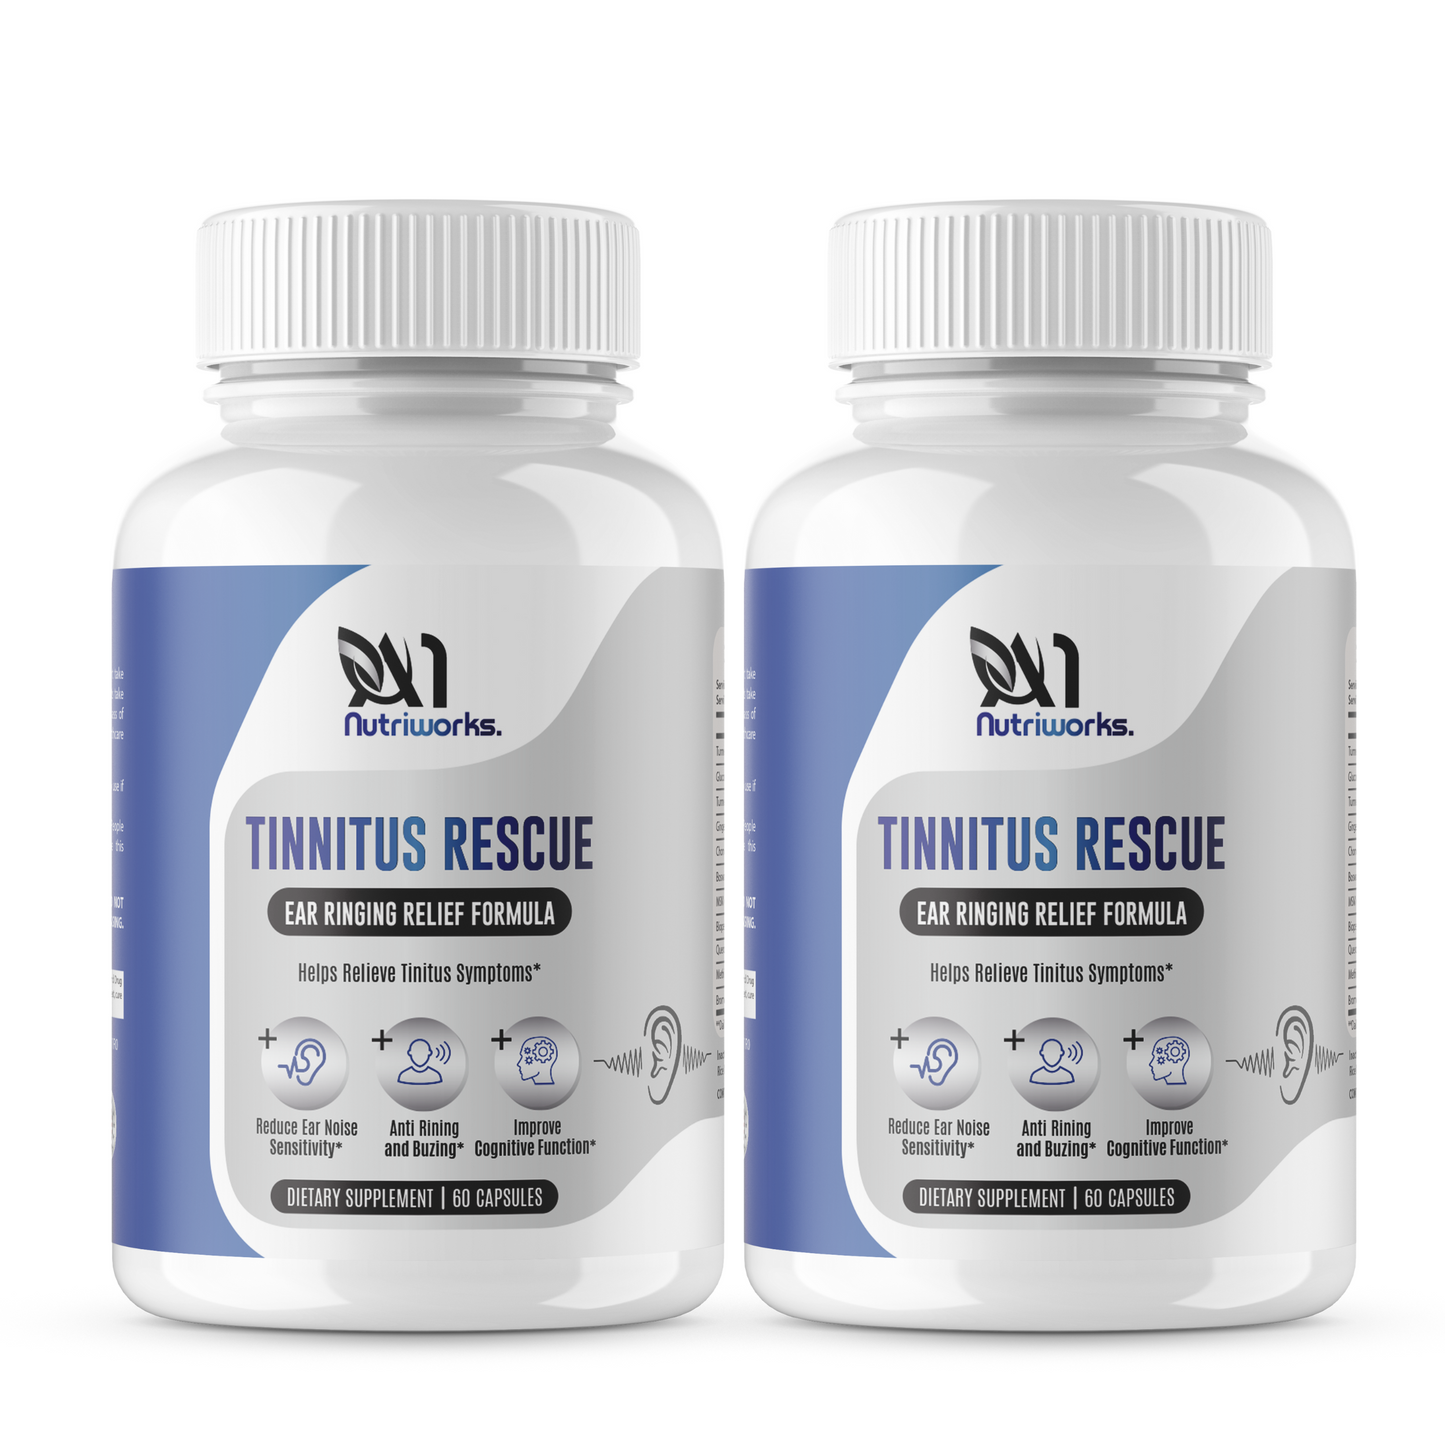 2 Month Supply Tinnitus Rescue A1 Tinnitus Relief Supplement - Ear Ringing Relief.